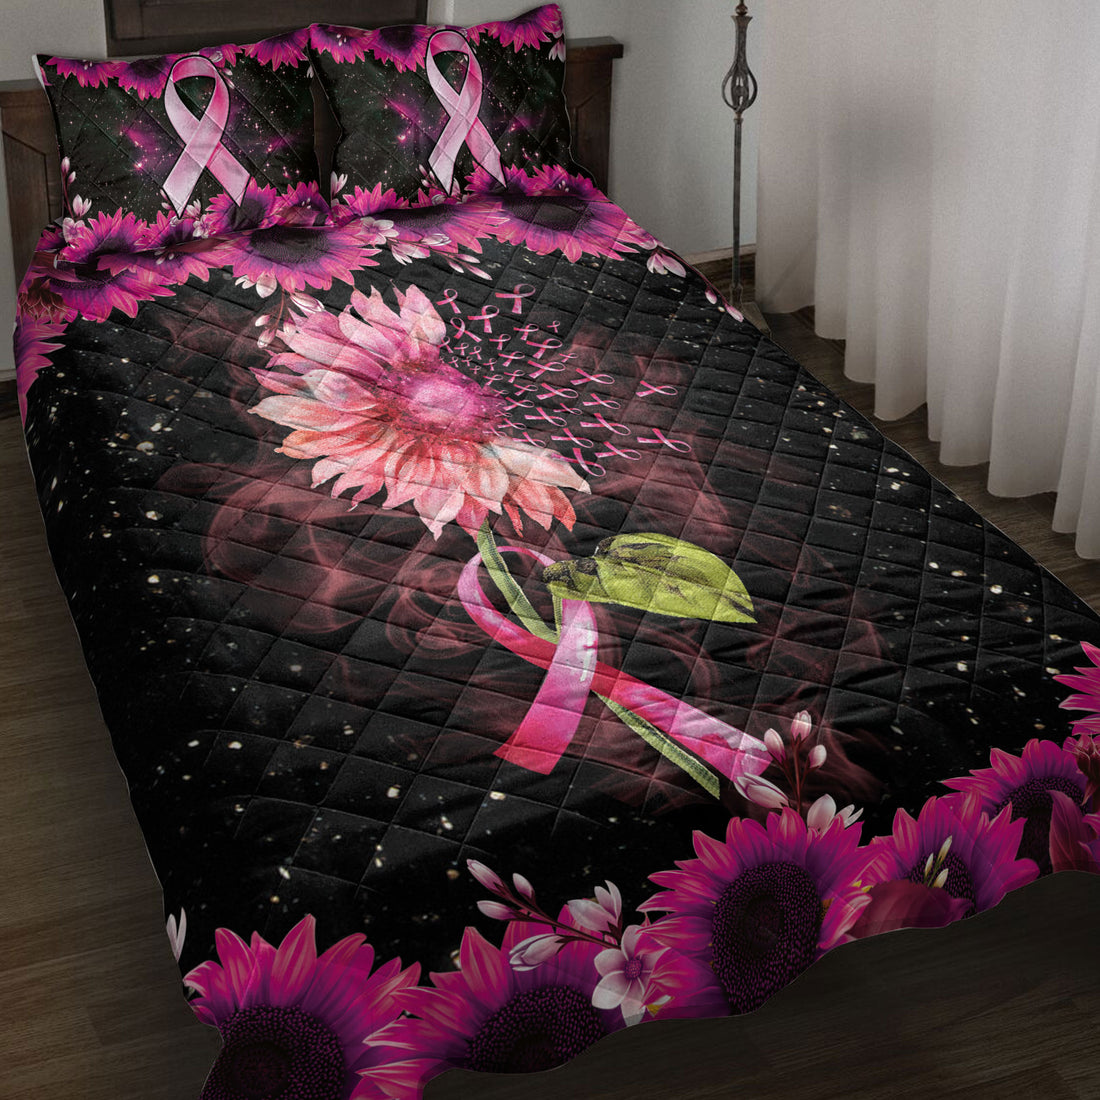 Ohaprints-Quilt-Bed-Set-Pillowcase-Breast-Cancer-Awareness-Pink-Bc-Support-Sunflower-Ribbon-Galaxy-Blanket-Bedspread-Bedding-3863-Throw (55'' x 60'')